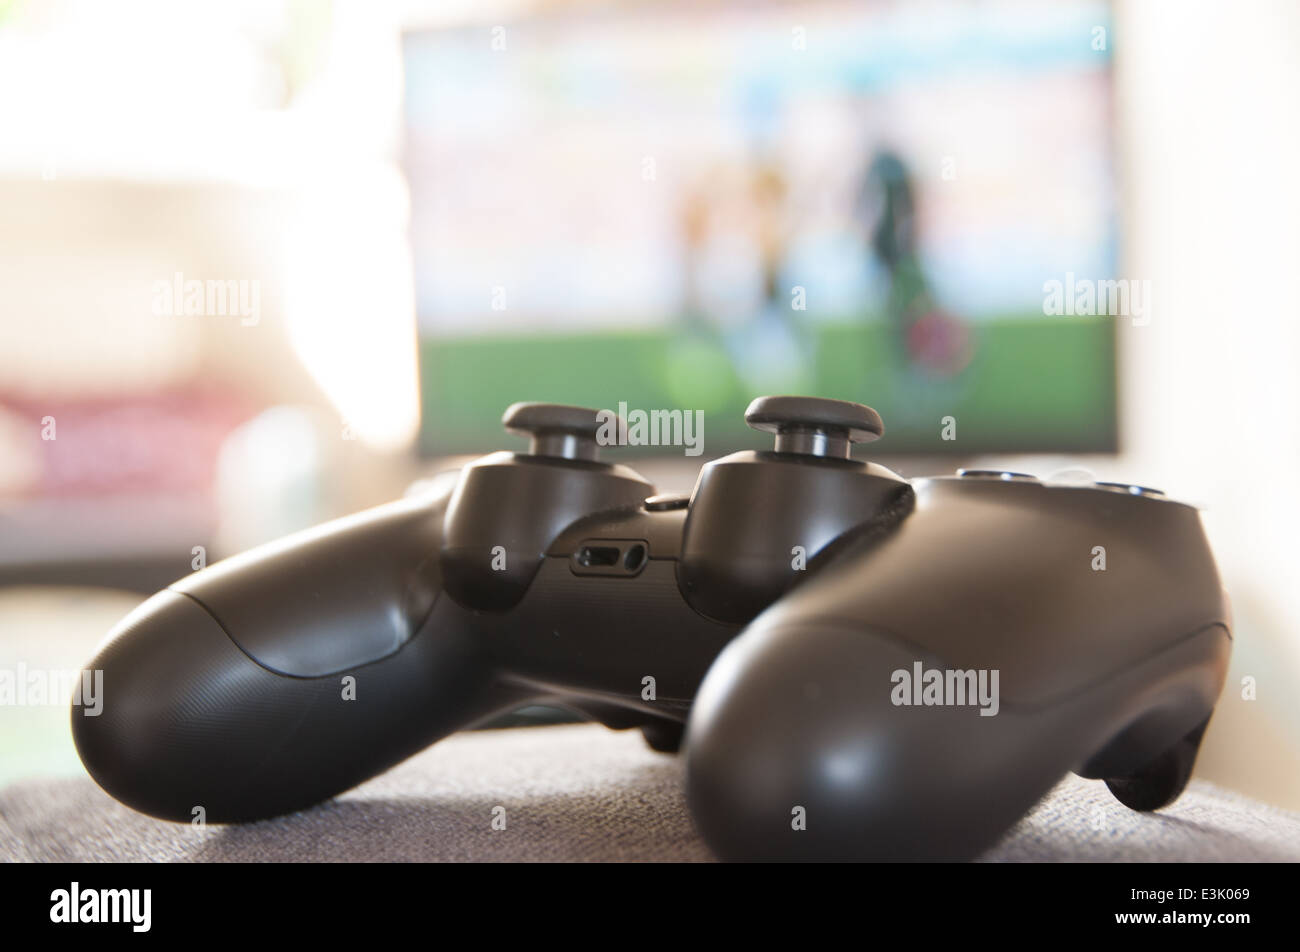 games controller sitting on a sofa arm with football game going on in the background Stock Photo